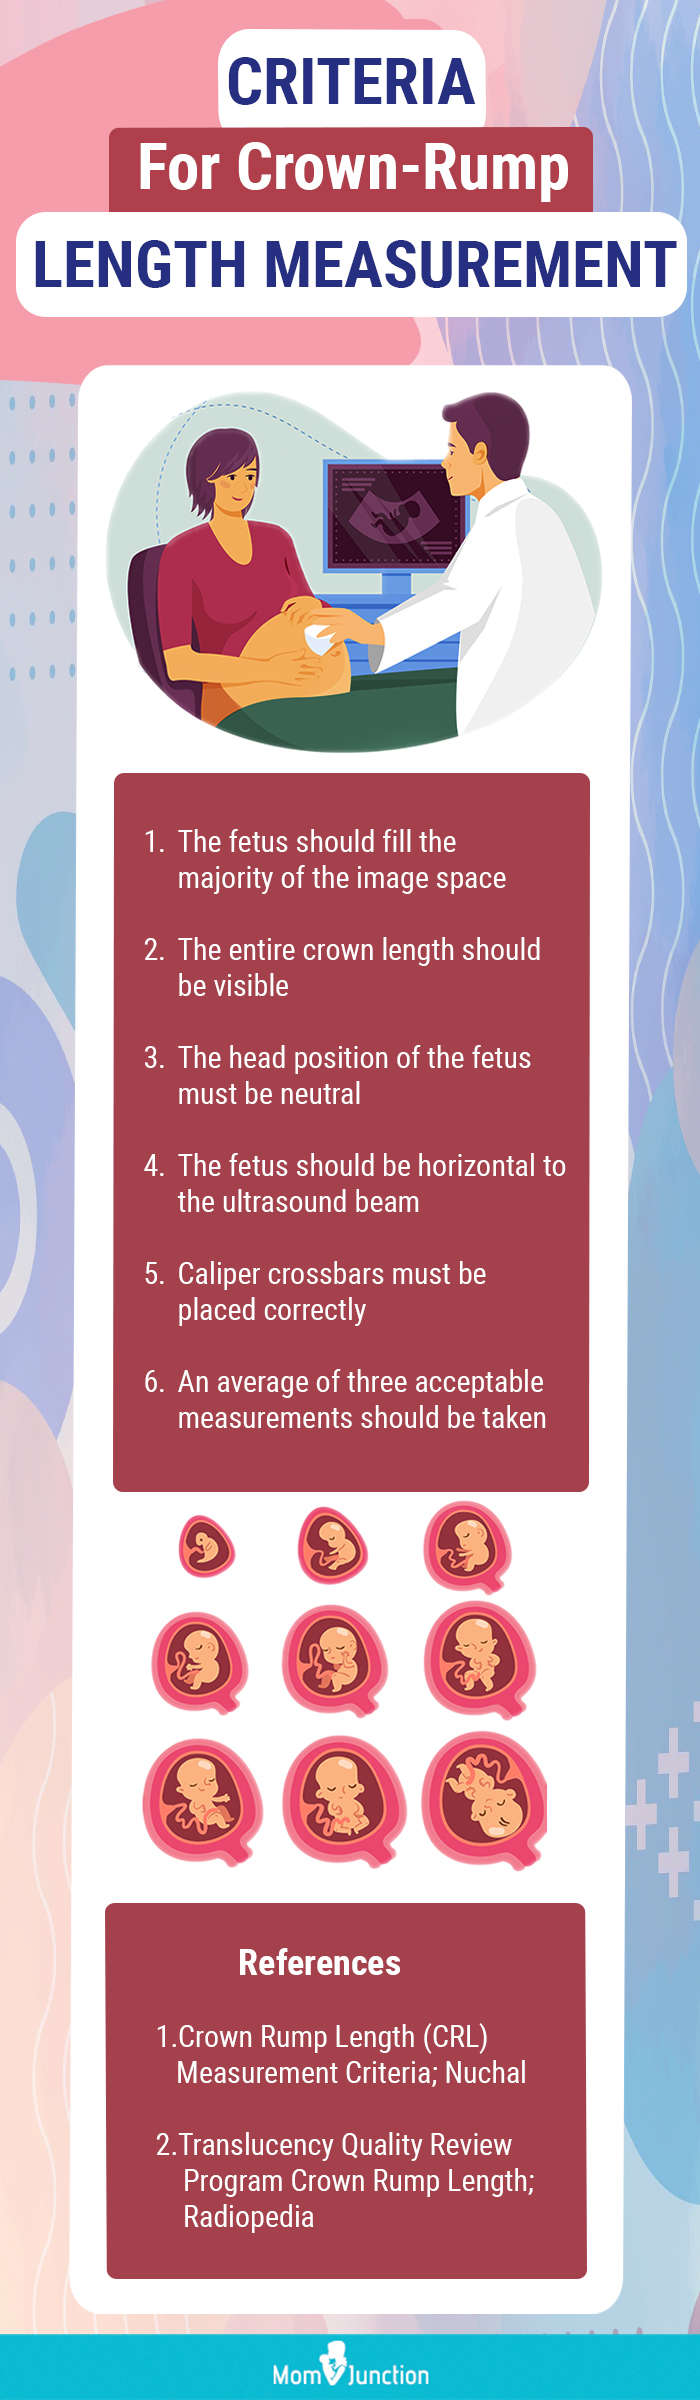 criteria for crown (infographic)